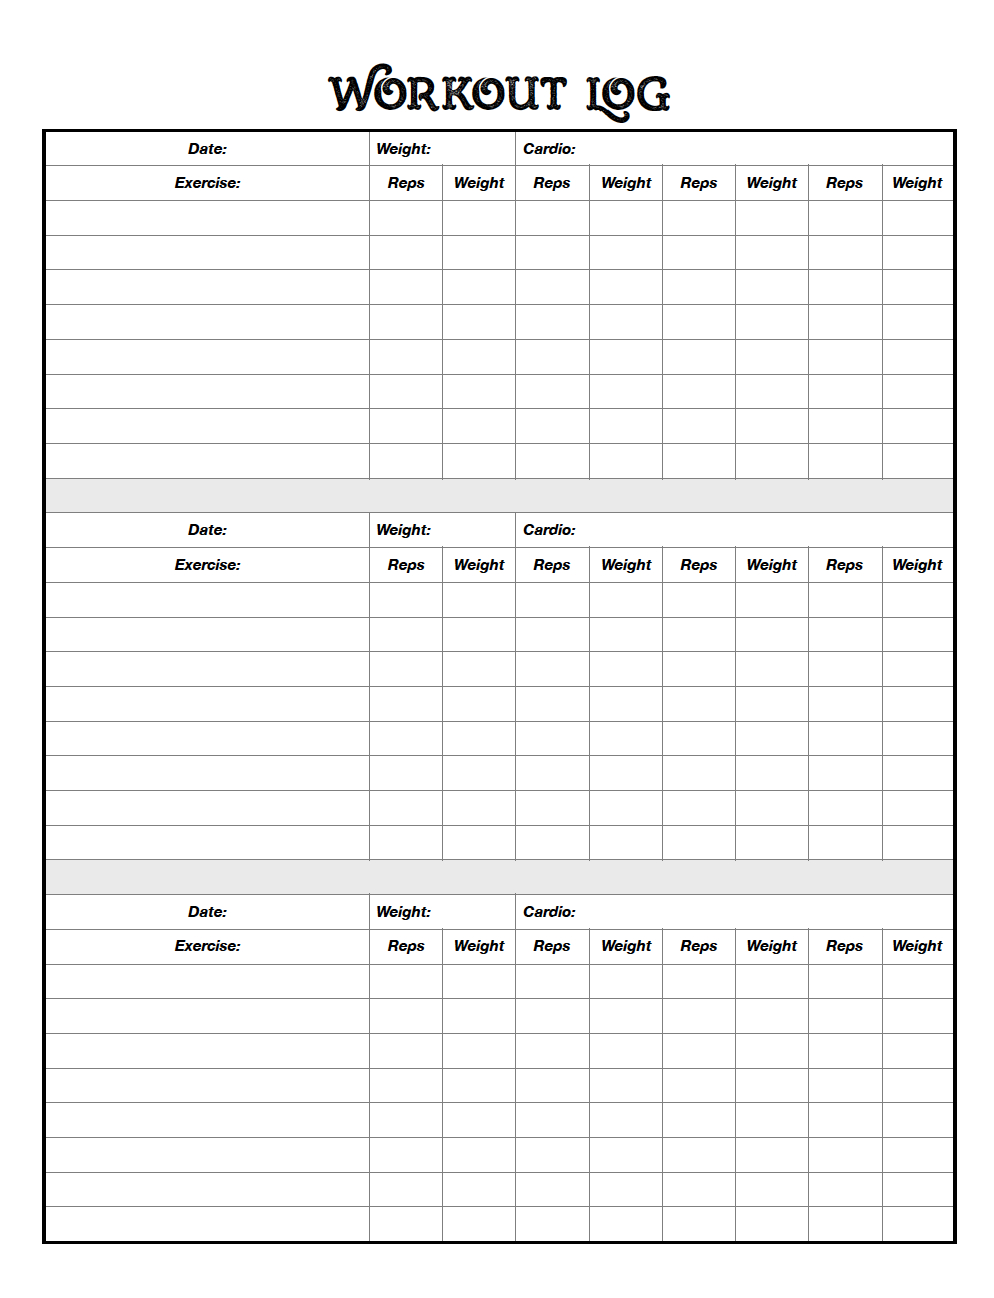 Free Printable Workout Logs: 3 Designs | Work Out Logs | Workout Log - Free Printable Workout Log